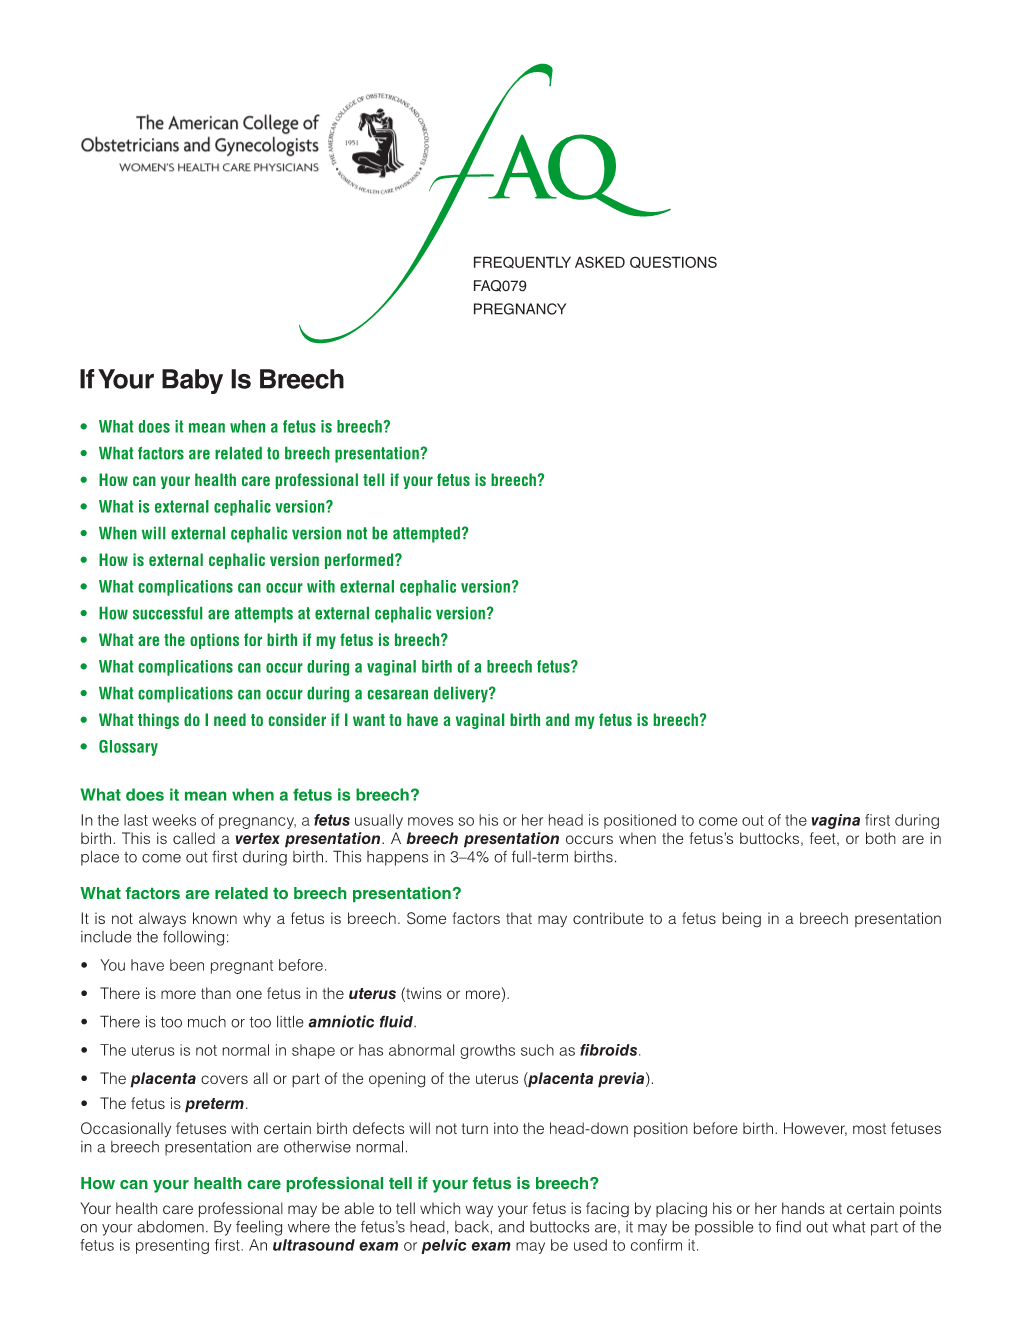 FAQ079 -- If Your Baby Is Breech